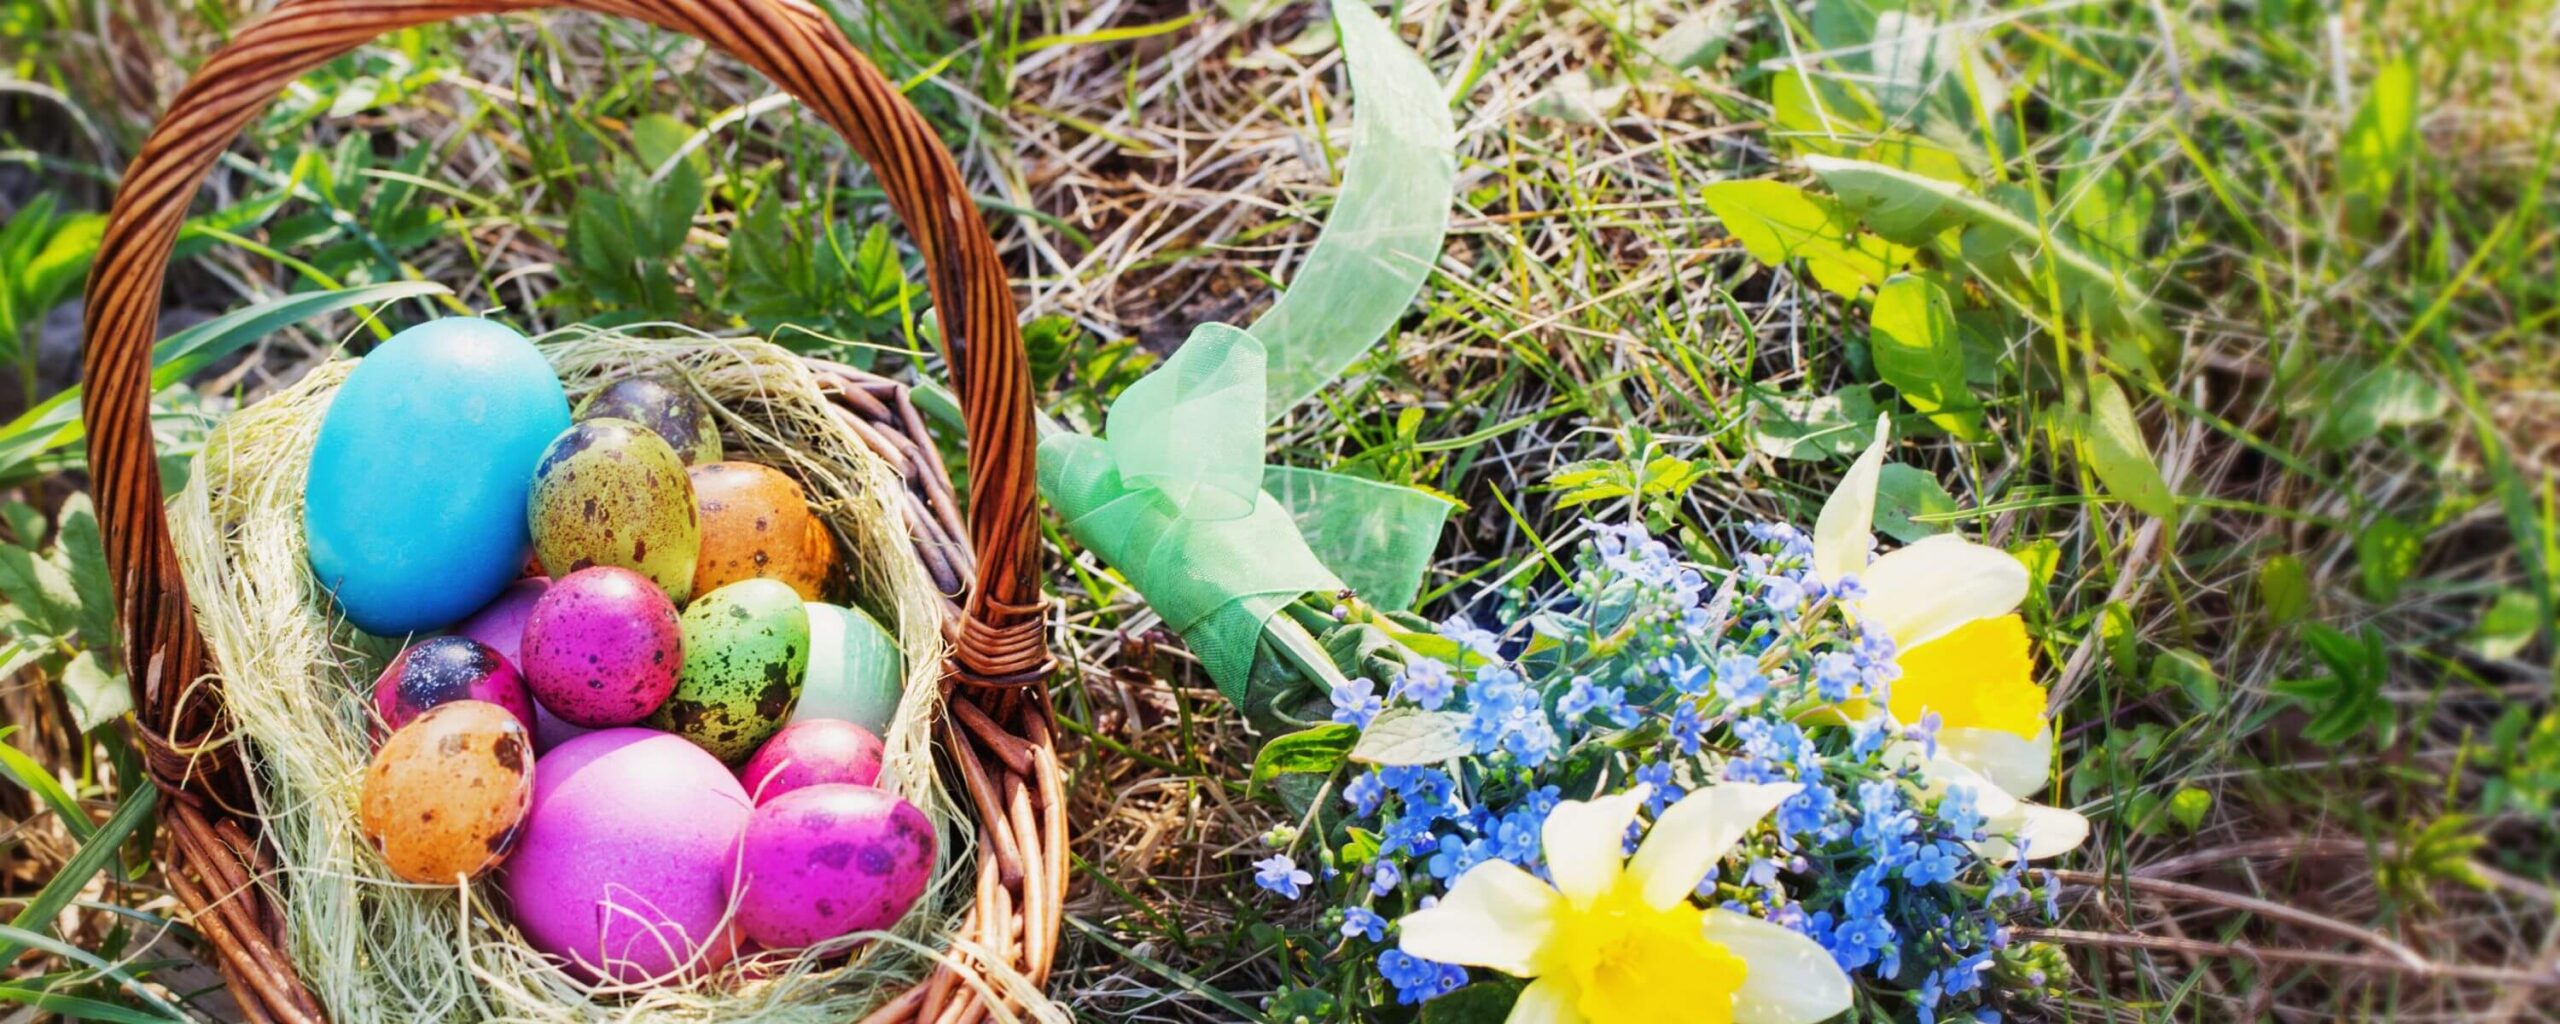 Easter traditions as an easter egg hunt outside